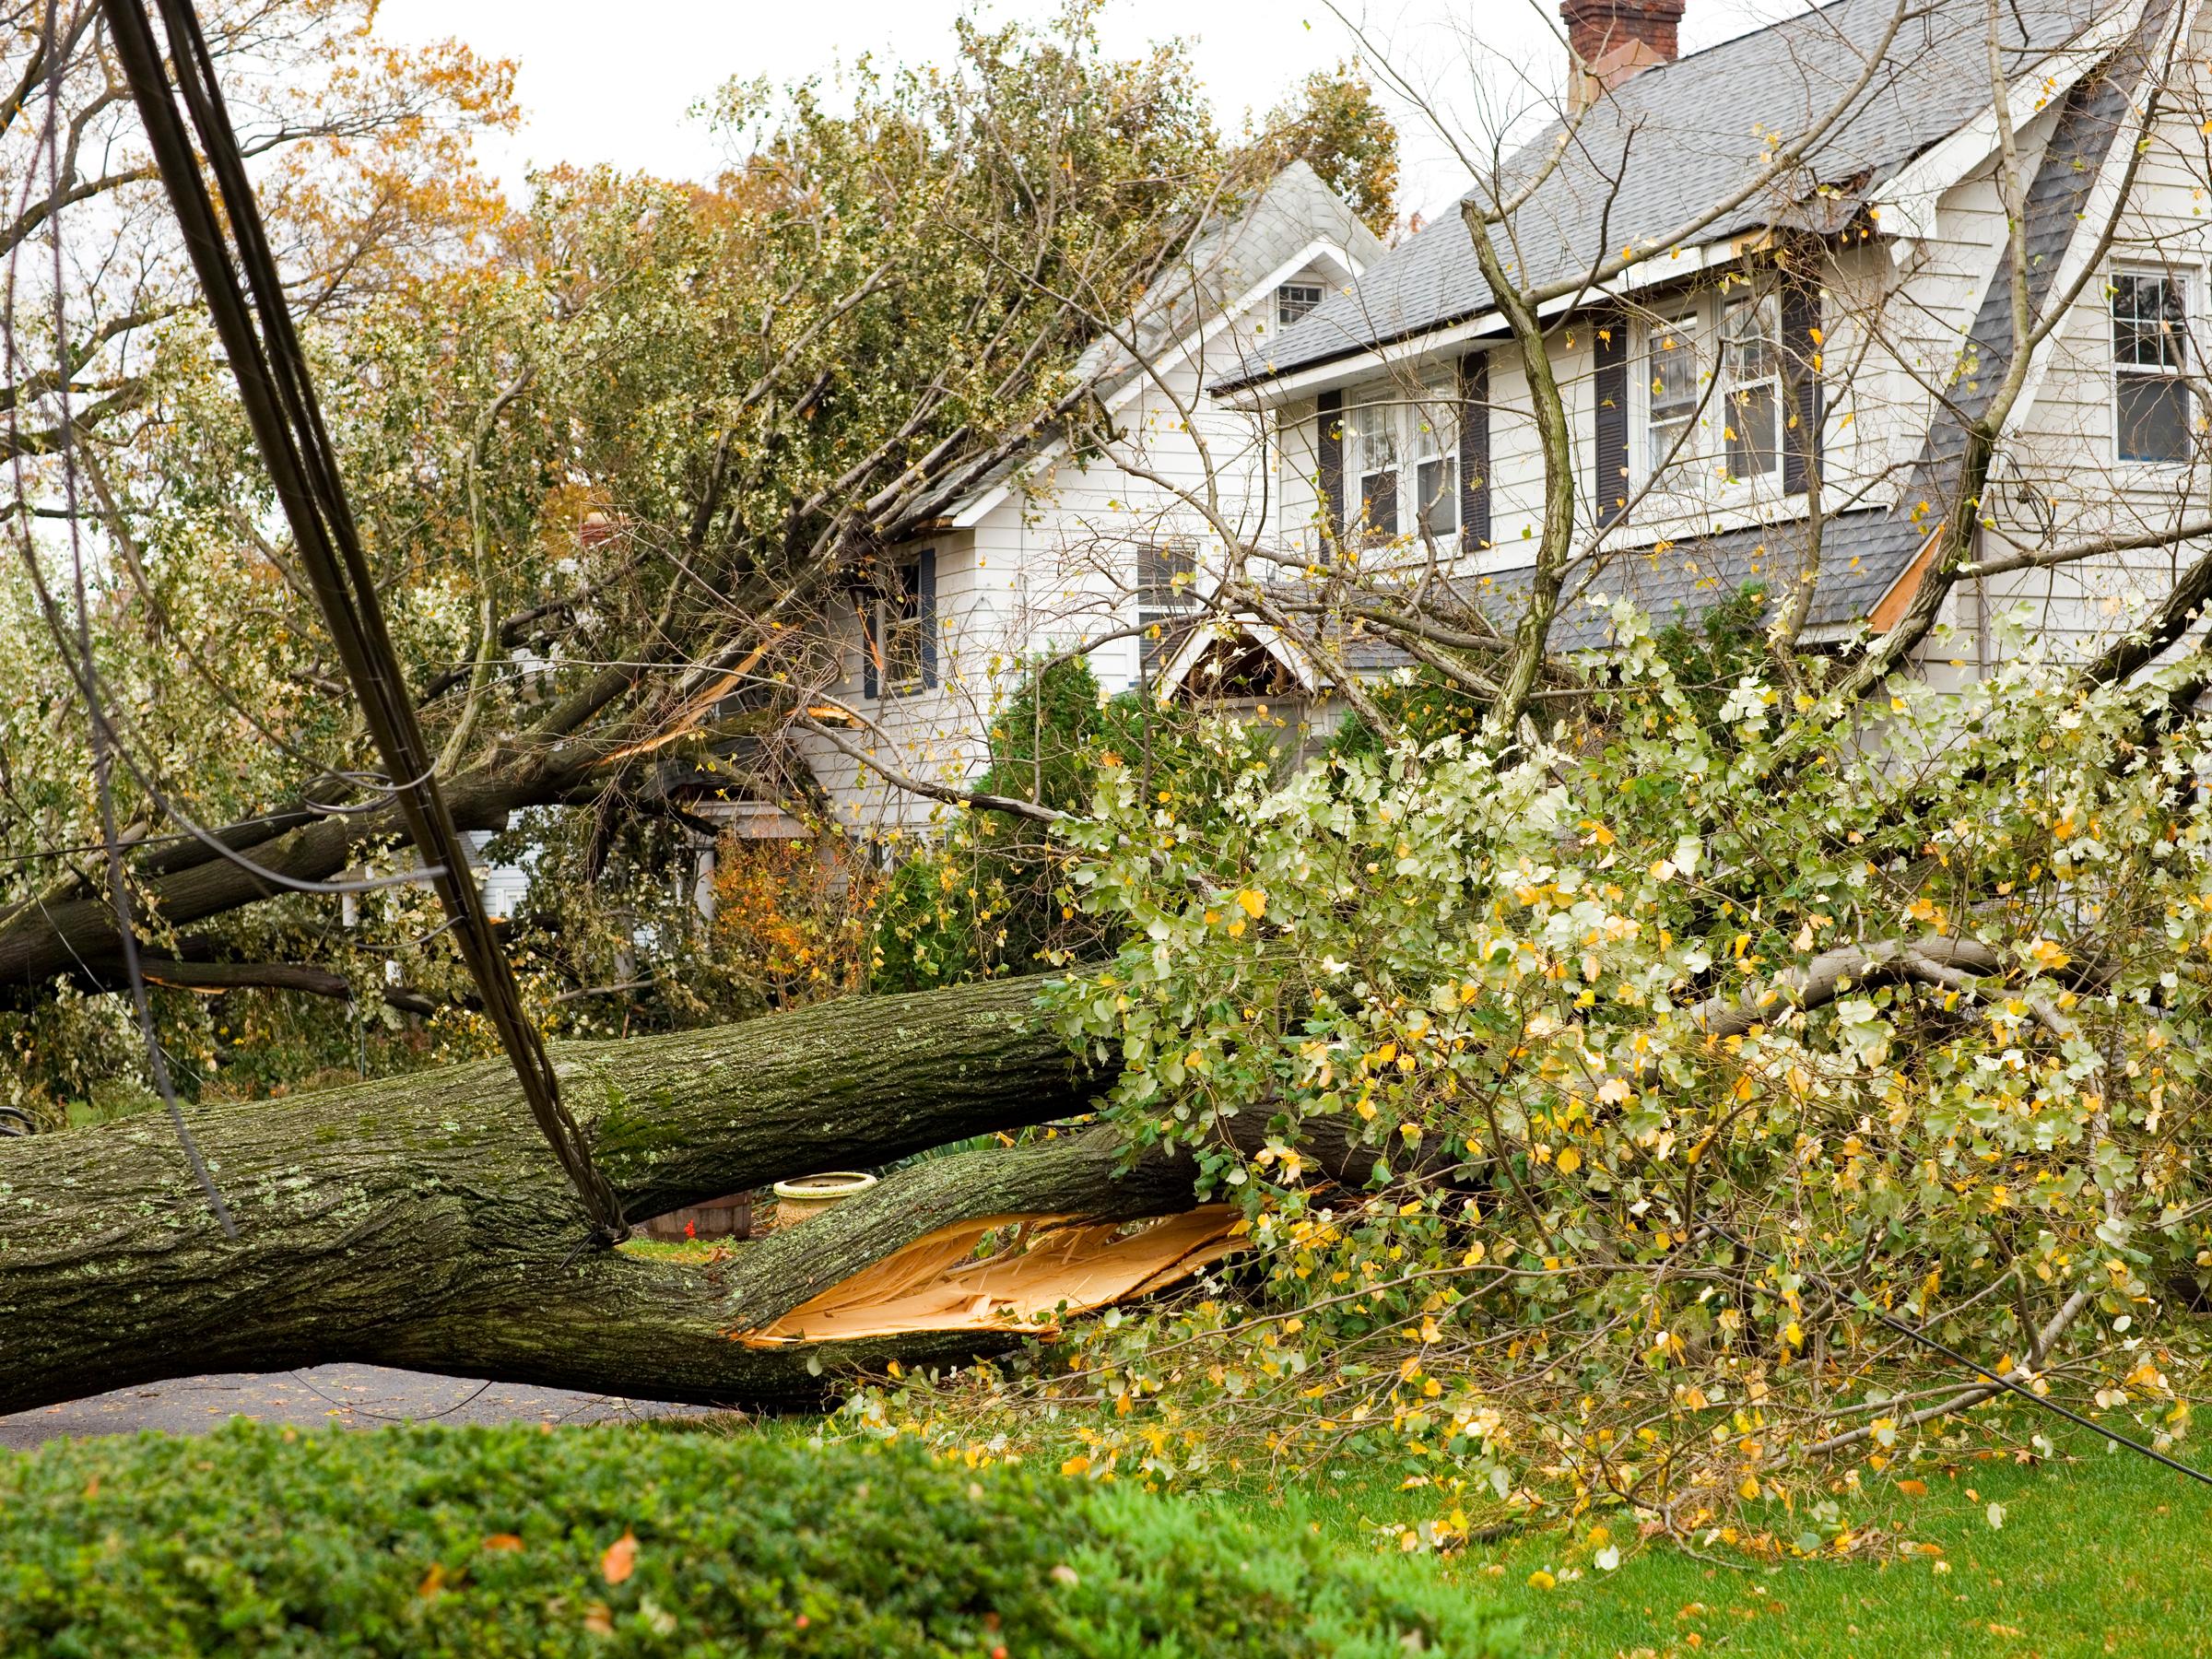 How to protect your home from a storm